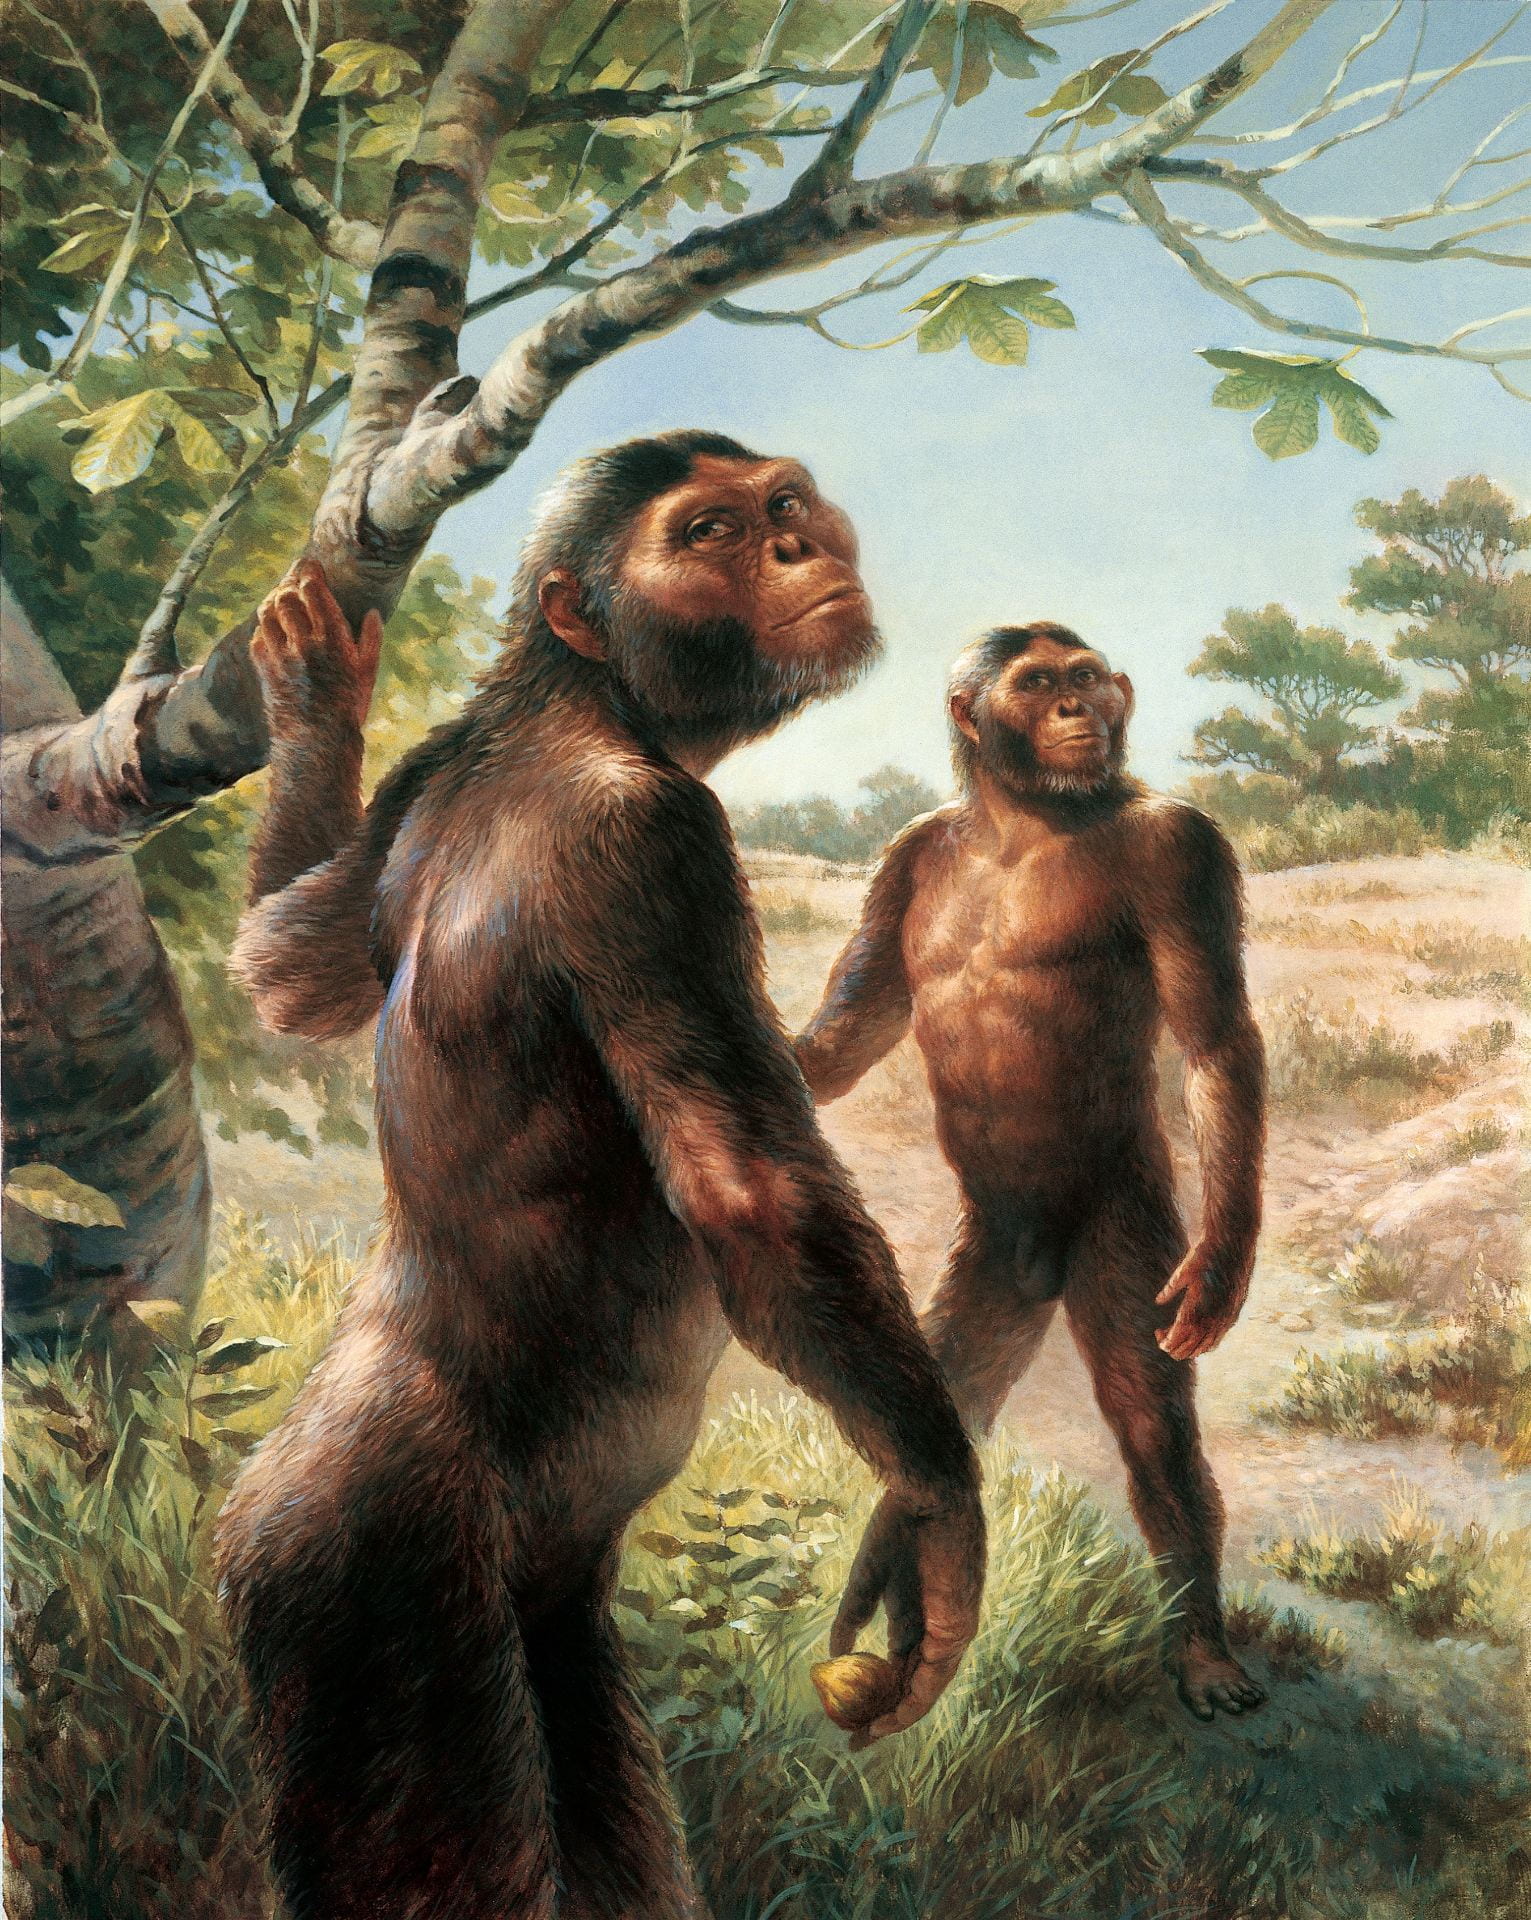 [An artist’s rendering of two Australopithecus afarensis. They are both standing upright and are partially covered in black hair all over their bodies. One is grabbing a low tree branch.]